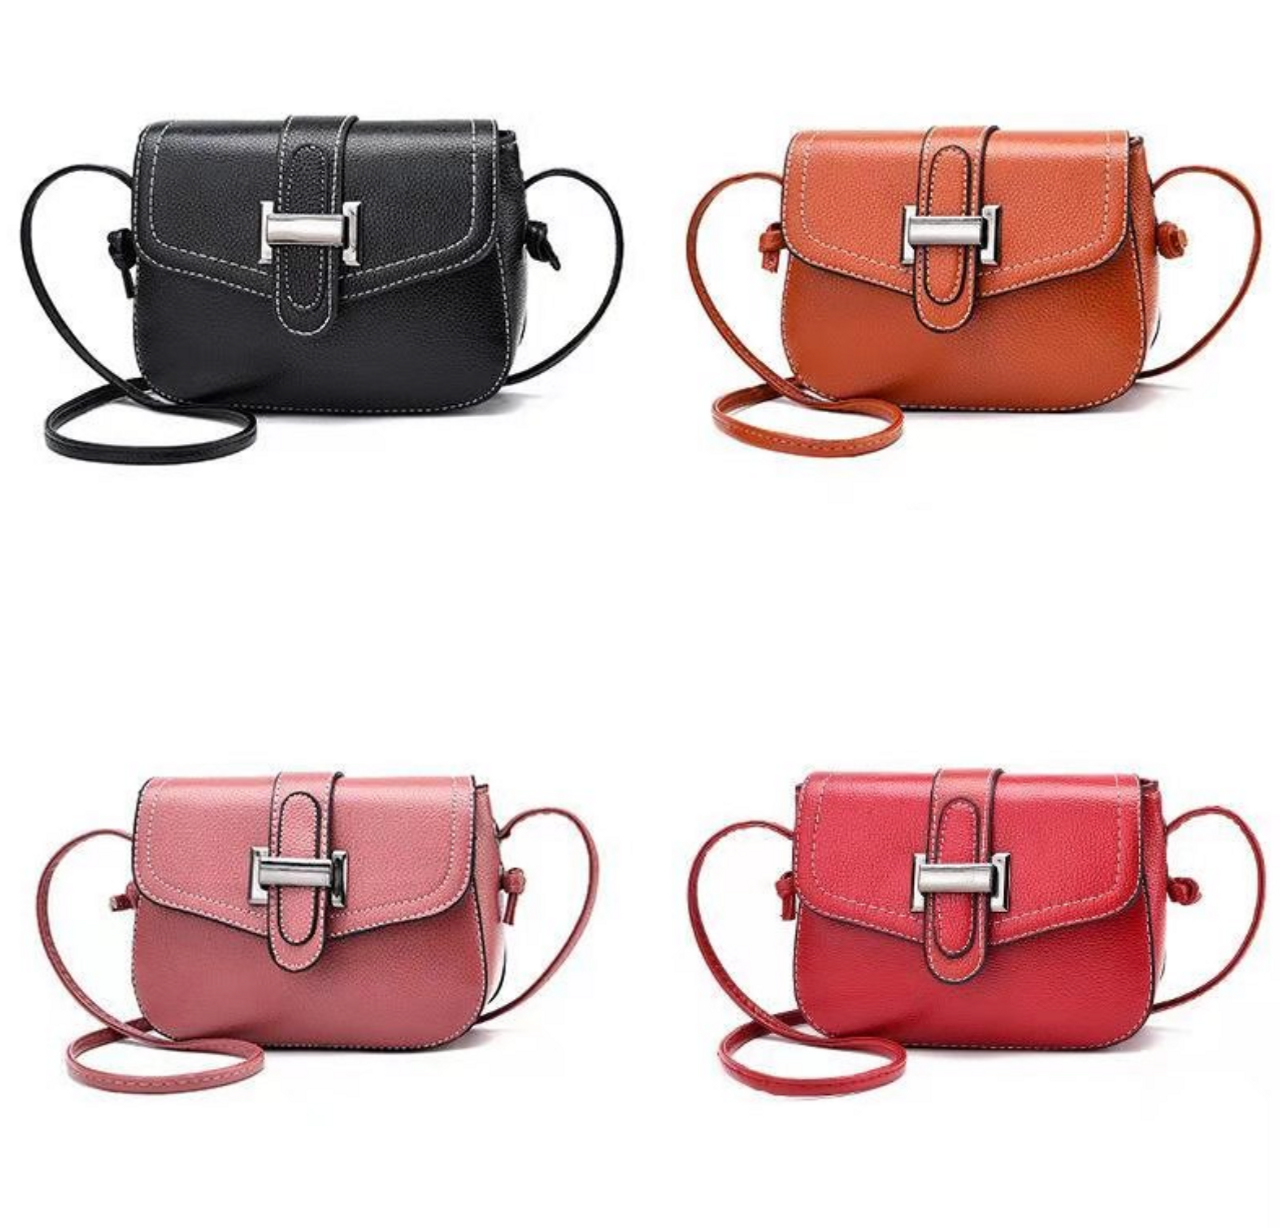 Women’s shoulder bag – Lots of Bags with Nice Colors